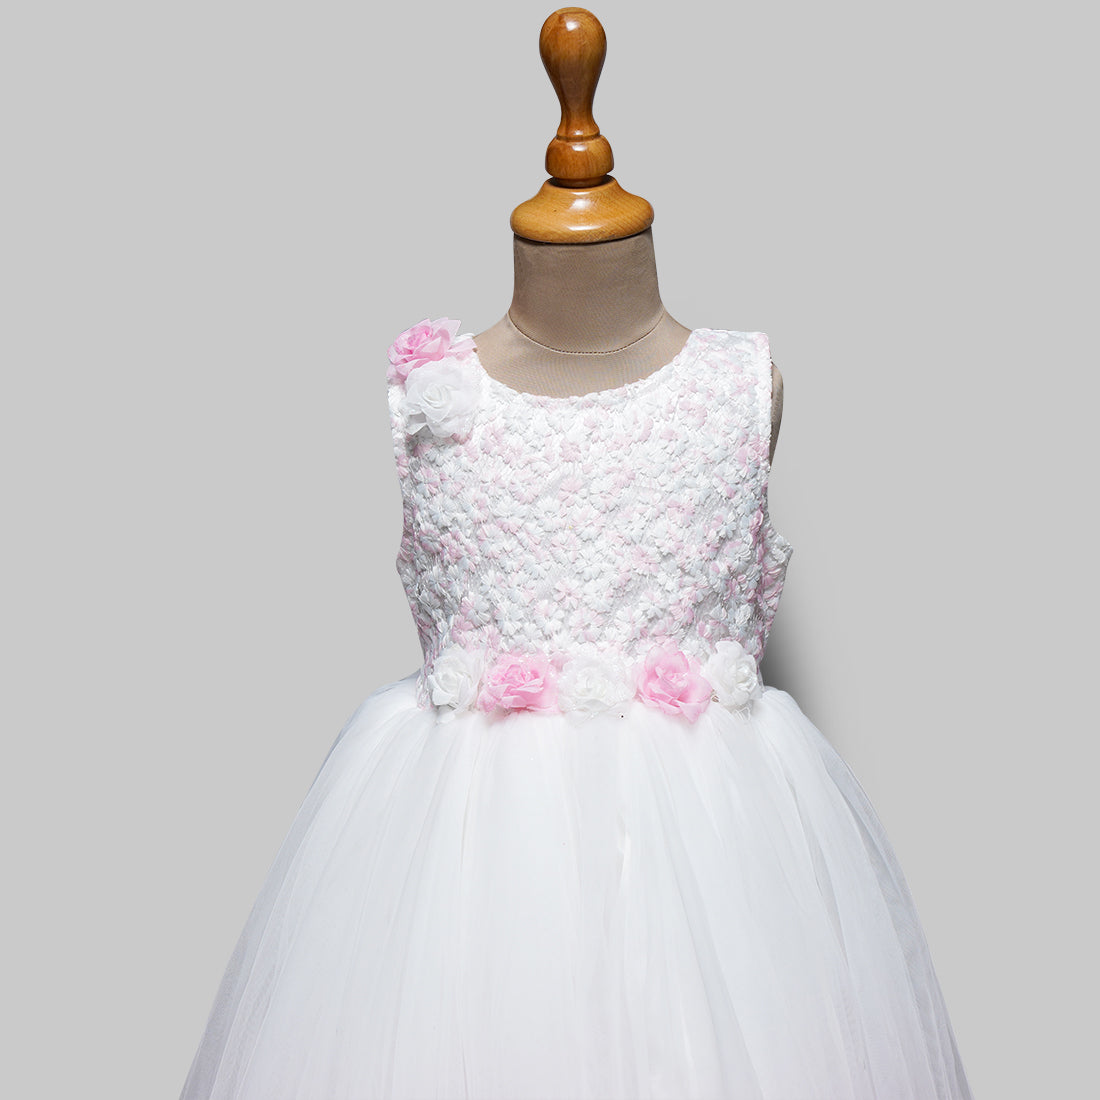 Designer White Gown With Floral Embellishments For Girls – Lagorii Kids